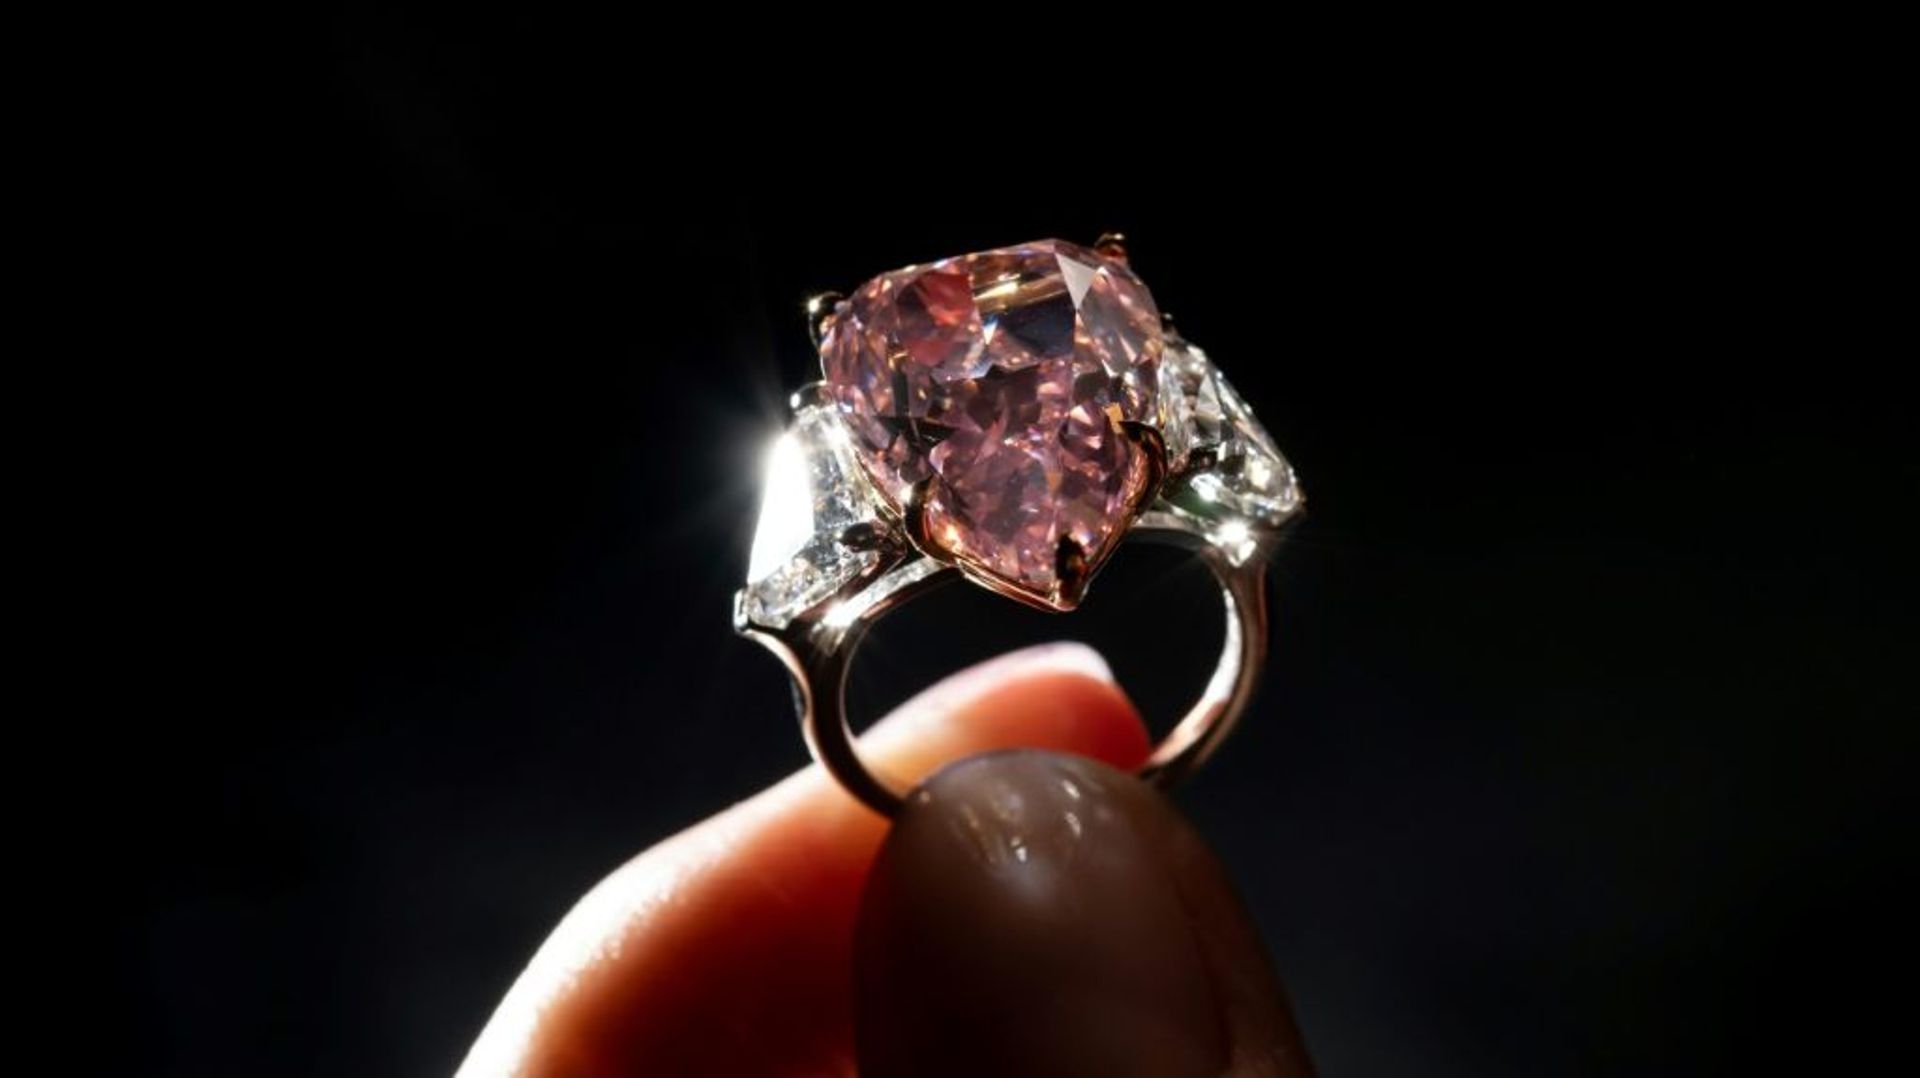 The gem is the largest pear-shaped pink diamond of its quality ever sold at auction